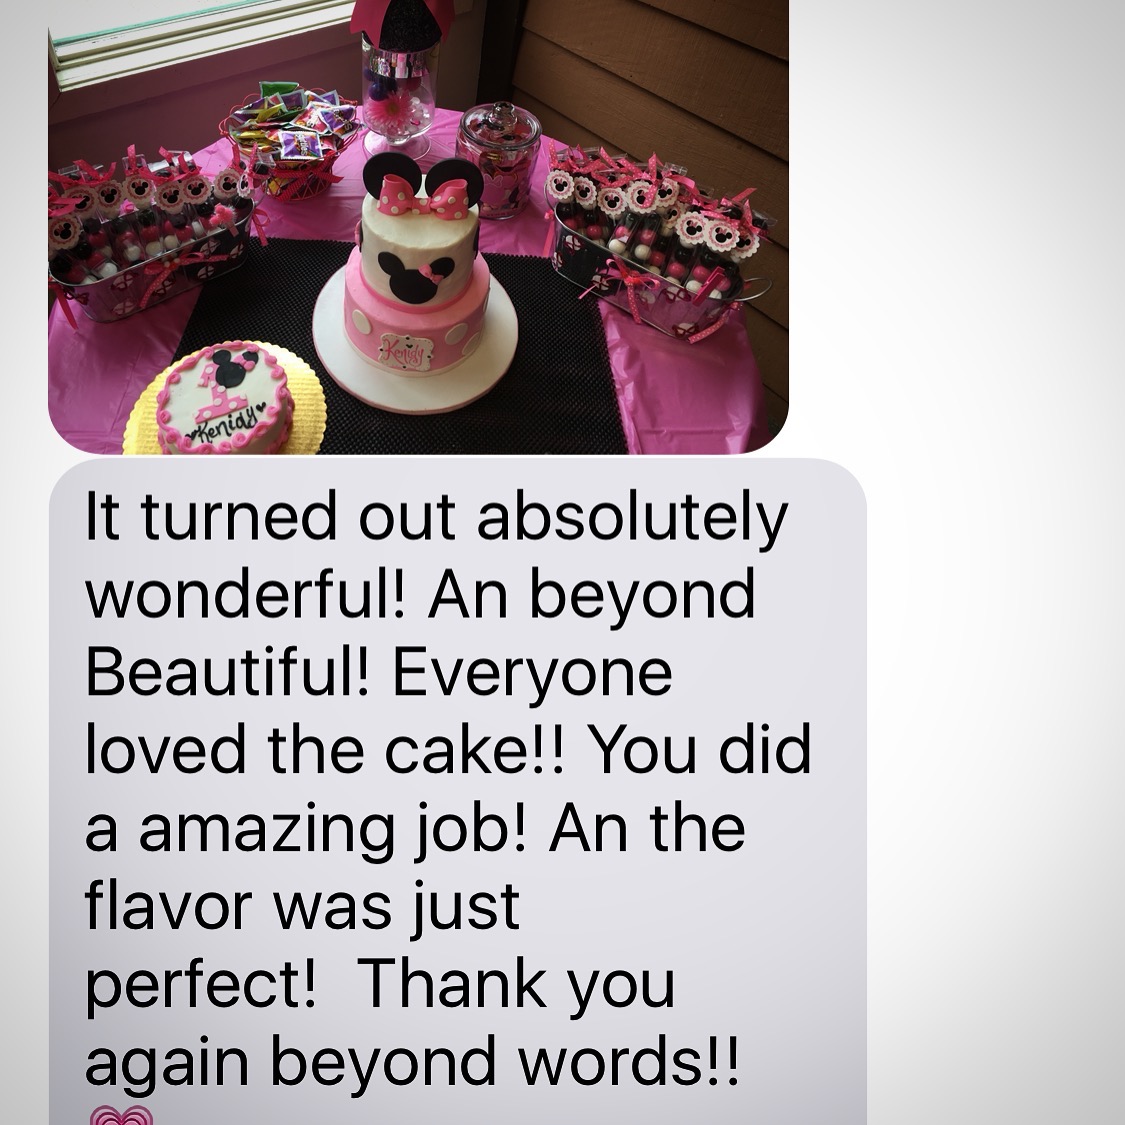 Joyful Treats - Making the edible, Incredible - Flourless Black-Out Cake  “It was DELISH” I jumped to joy when I received this compliment from a very  well known baker and friend. This